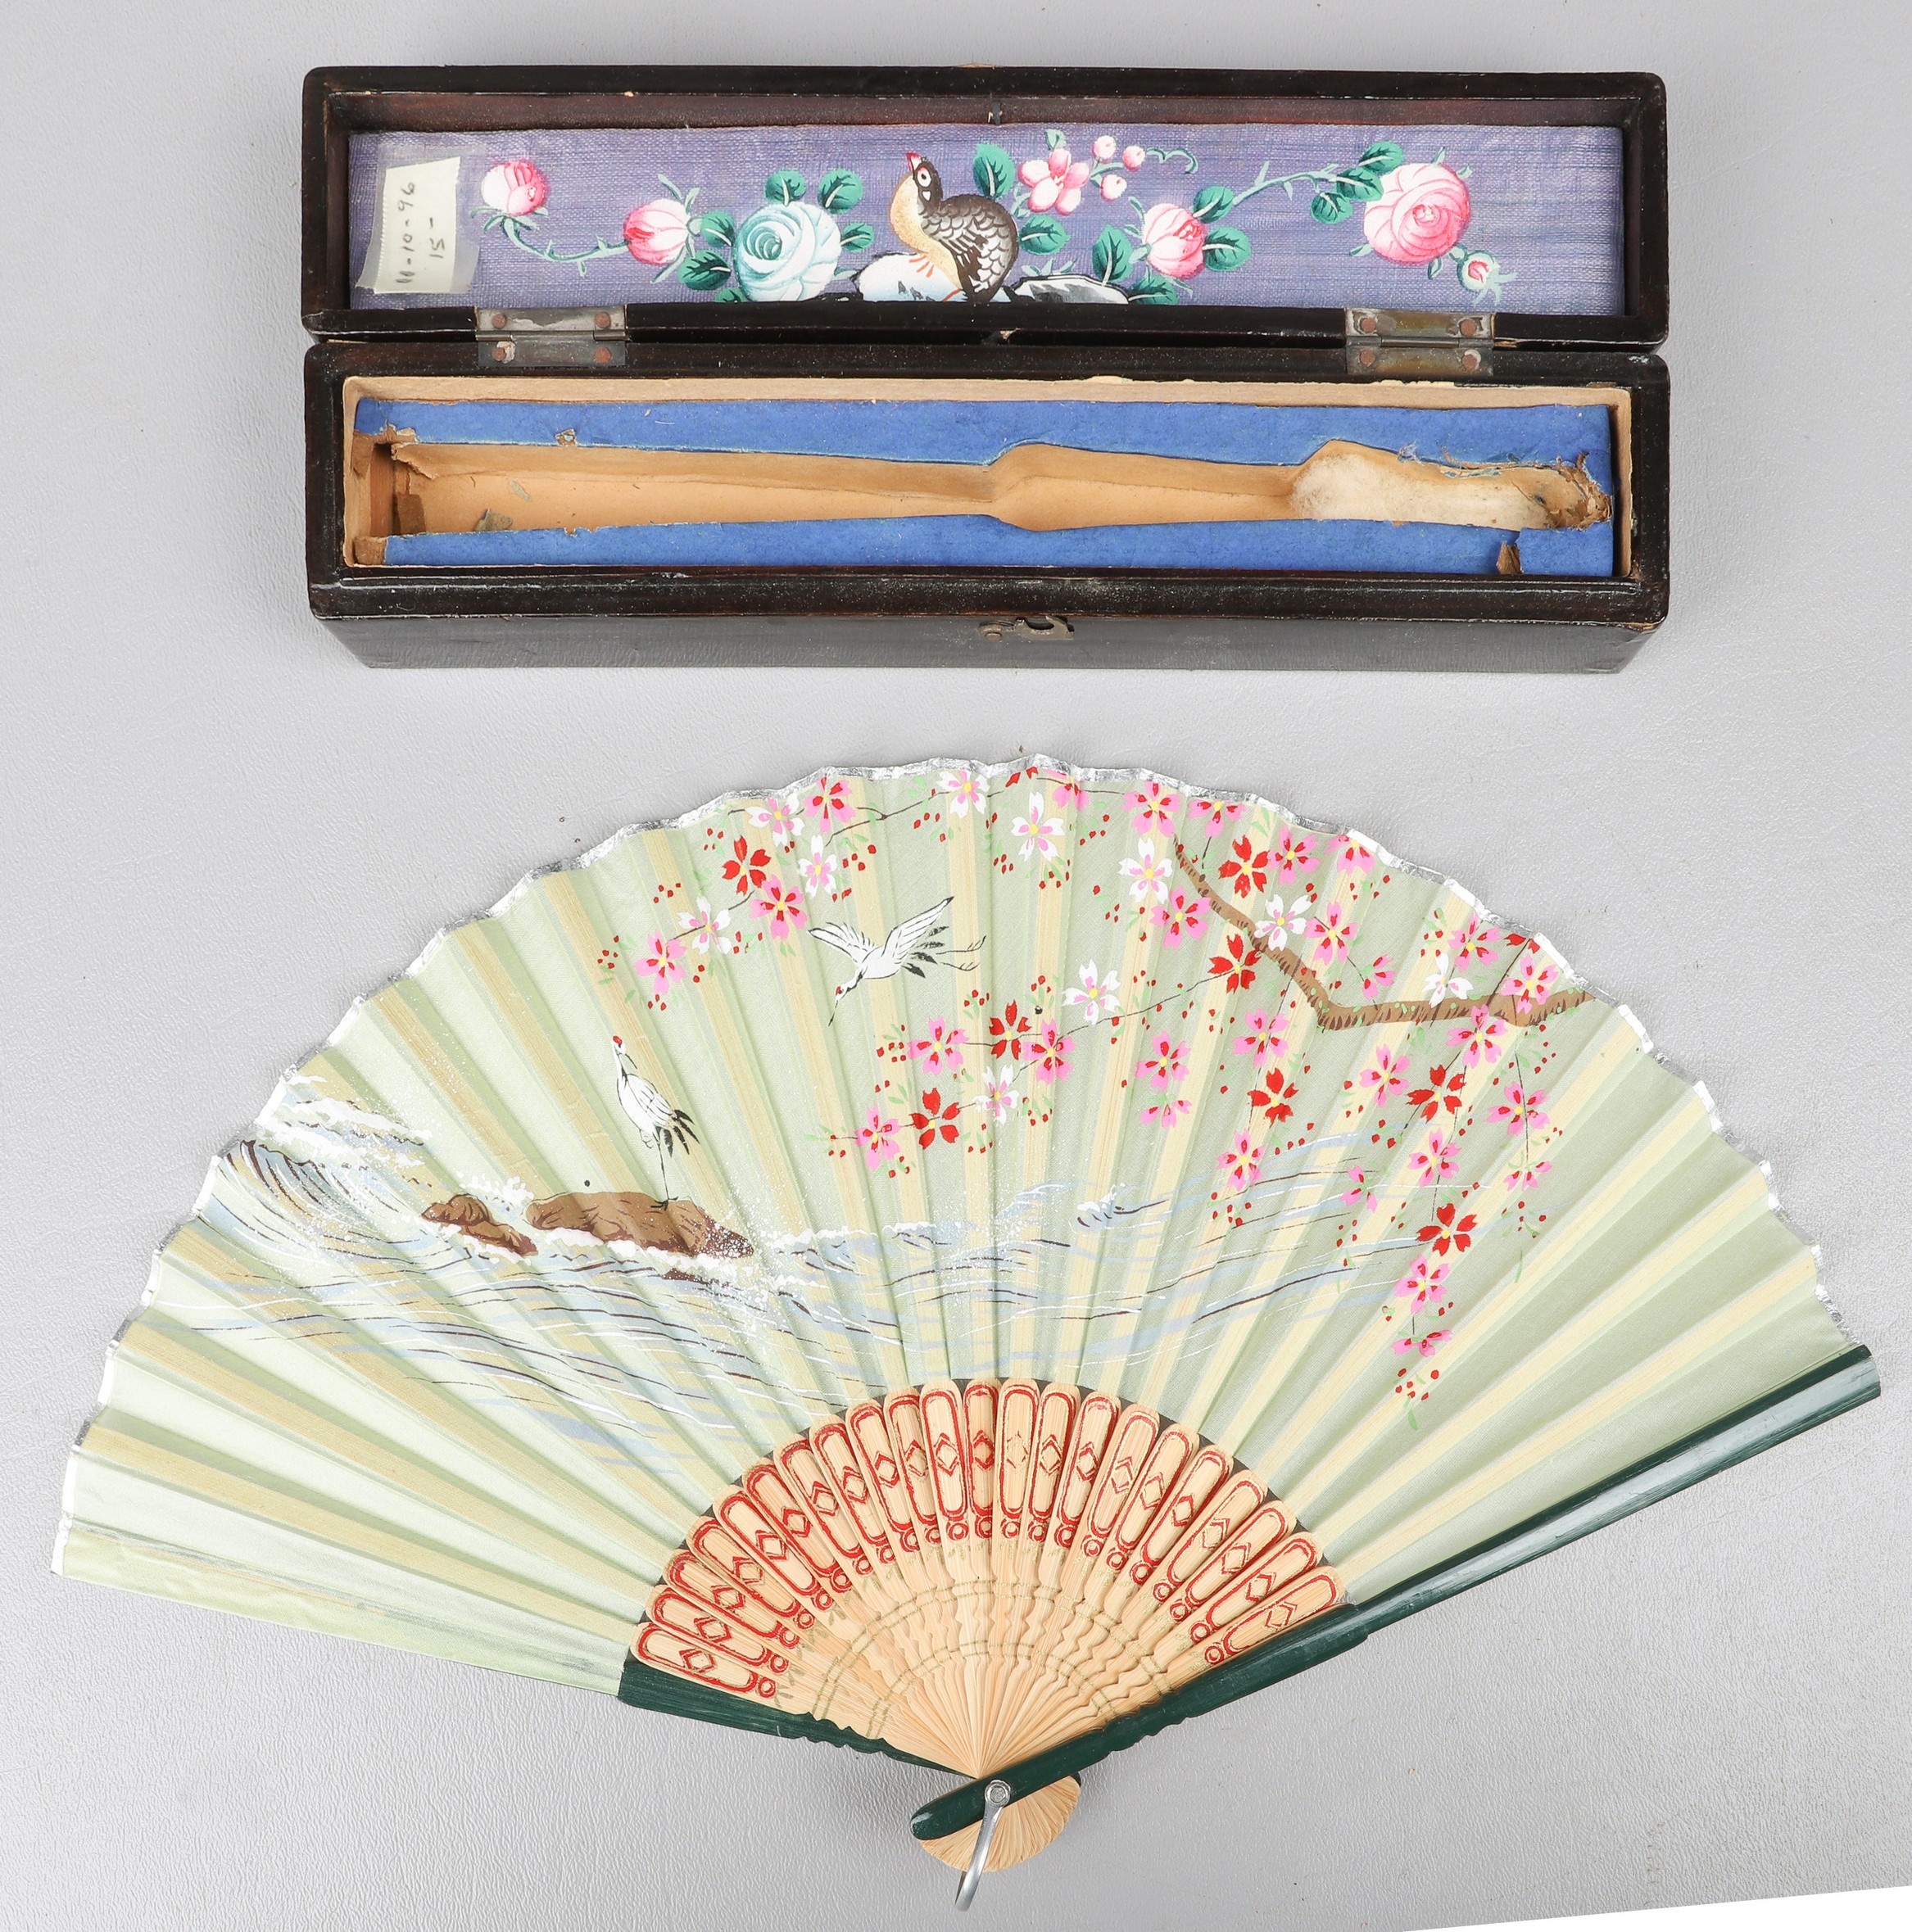  2 Chinese lacquer fan boxes  2e0aad